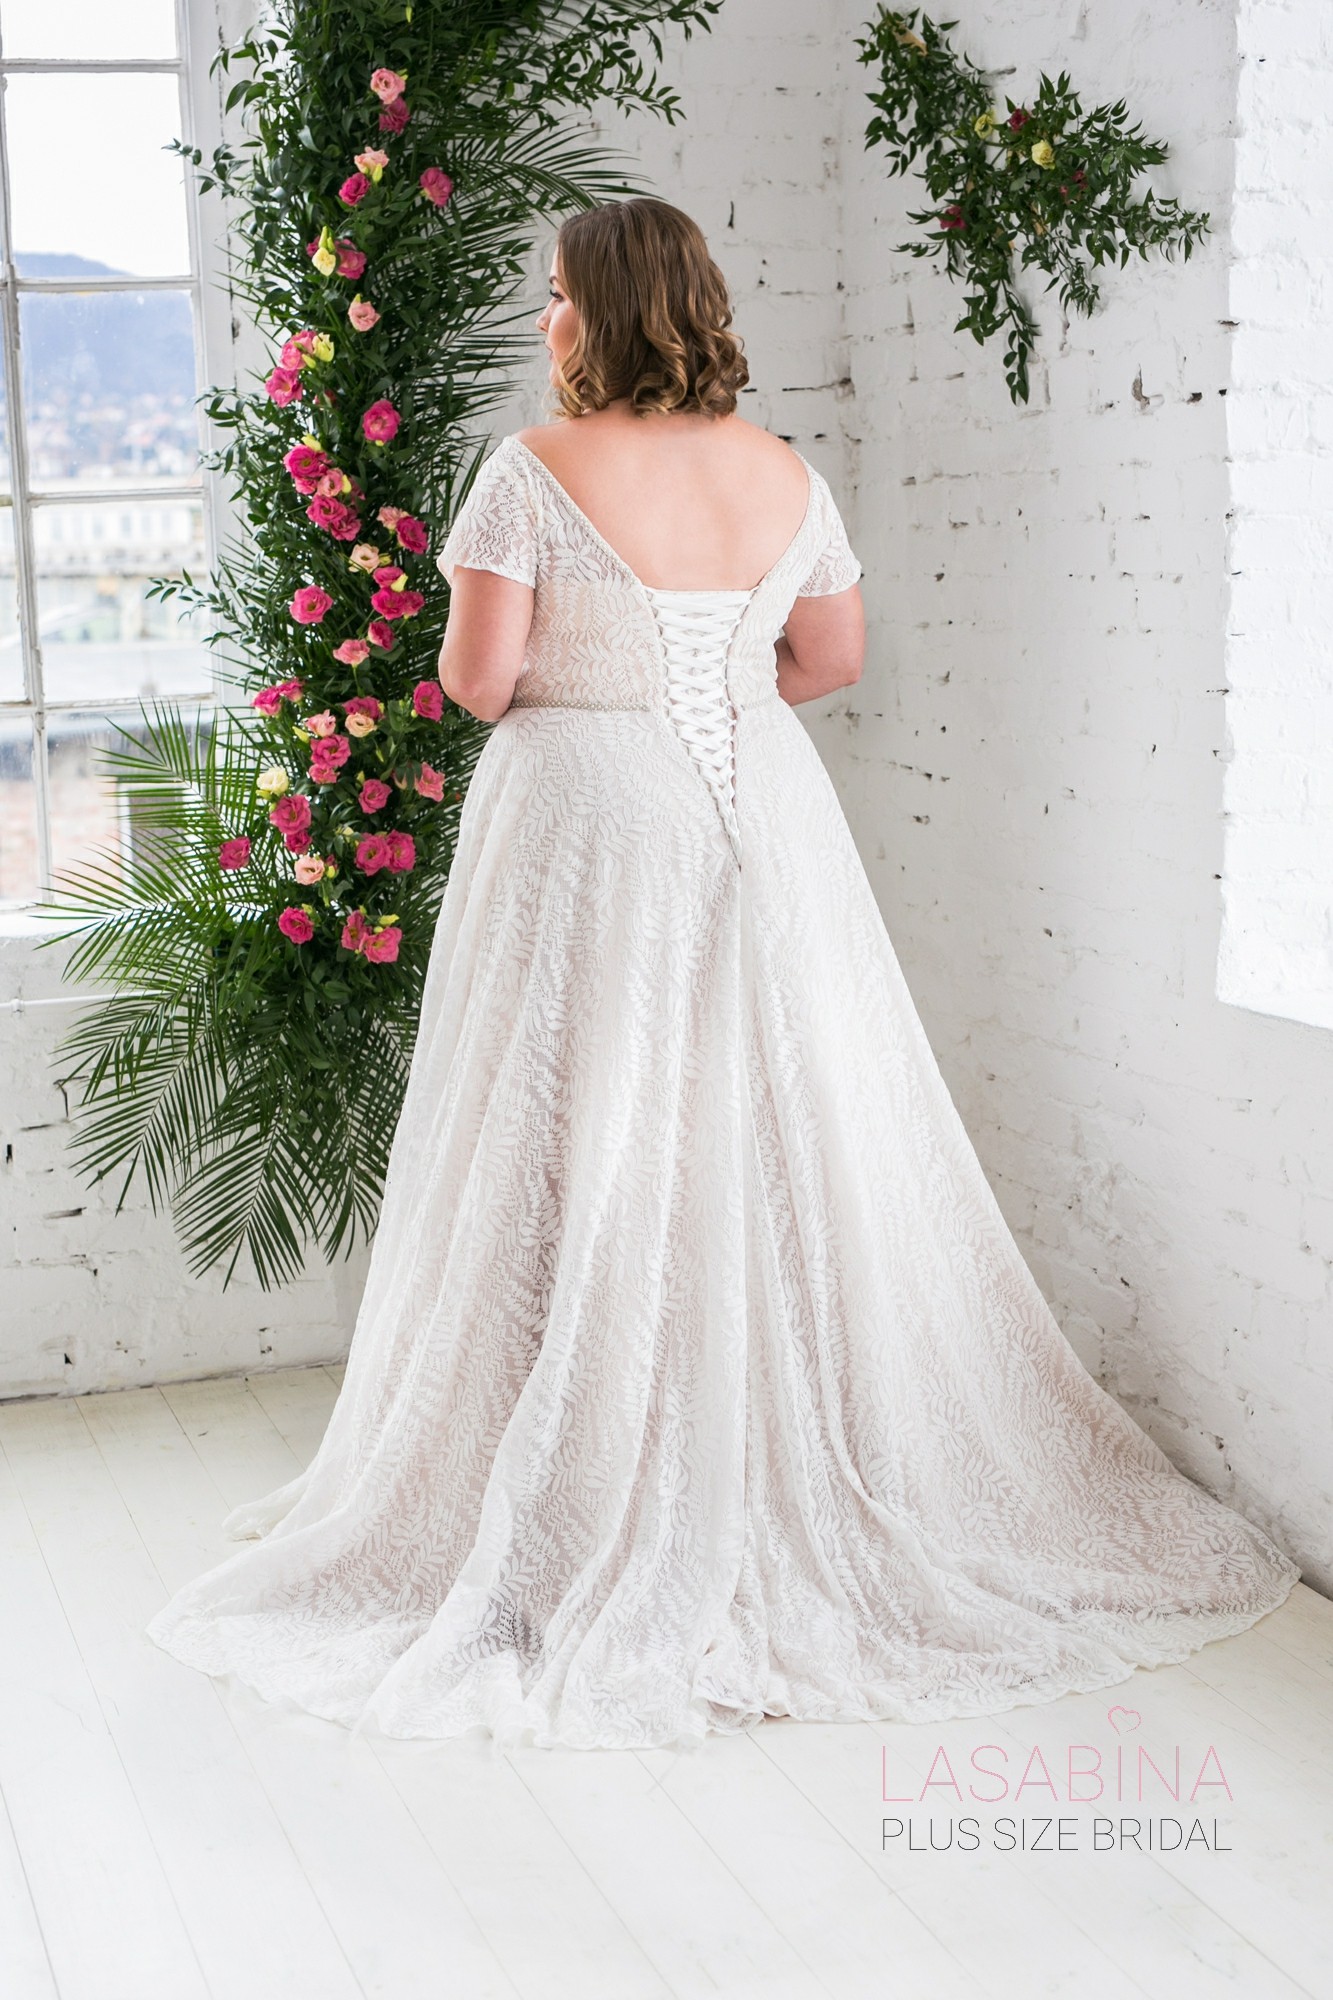 annelies wynants recommends christina model wedding dress pic